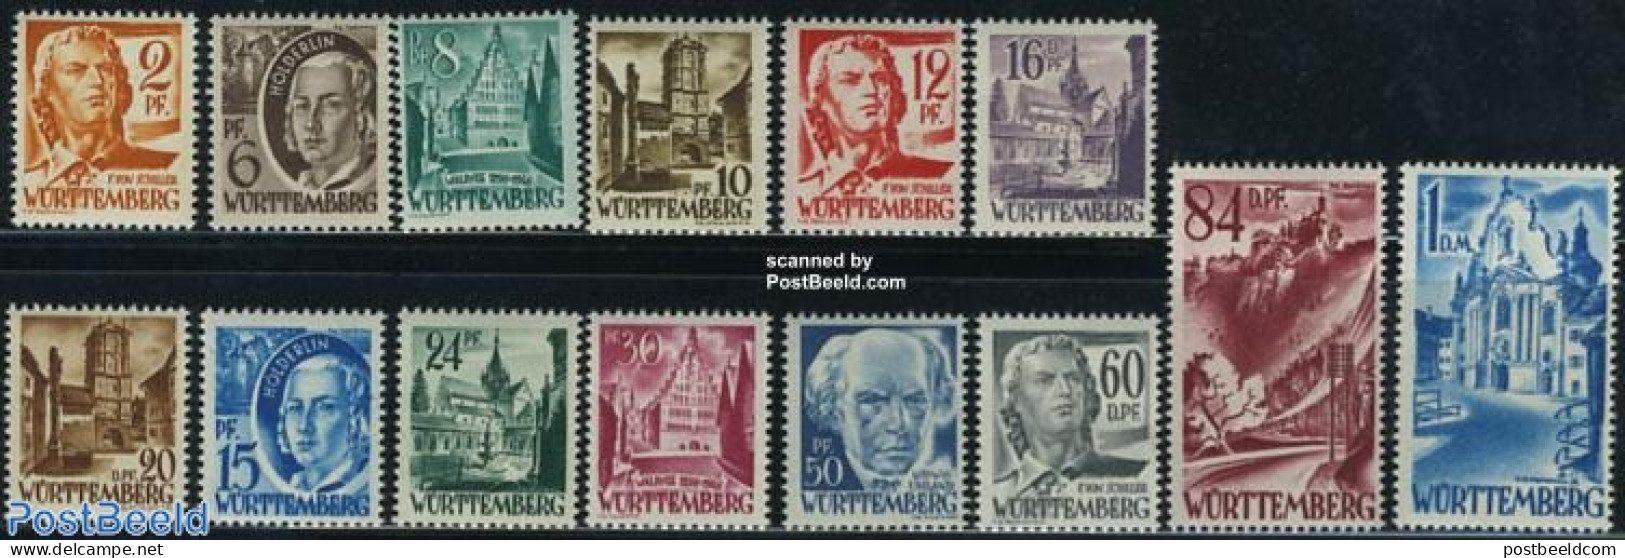 Germany, French Zone 1948 Wurttemberg, Definitives 14v, Unused (hinged), Religion - Churches, Temples, Mosques, Synago.. - Churches & Cathedrals